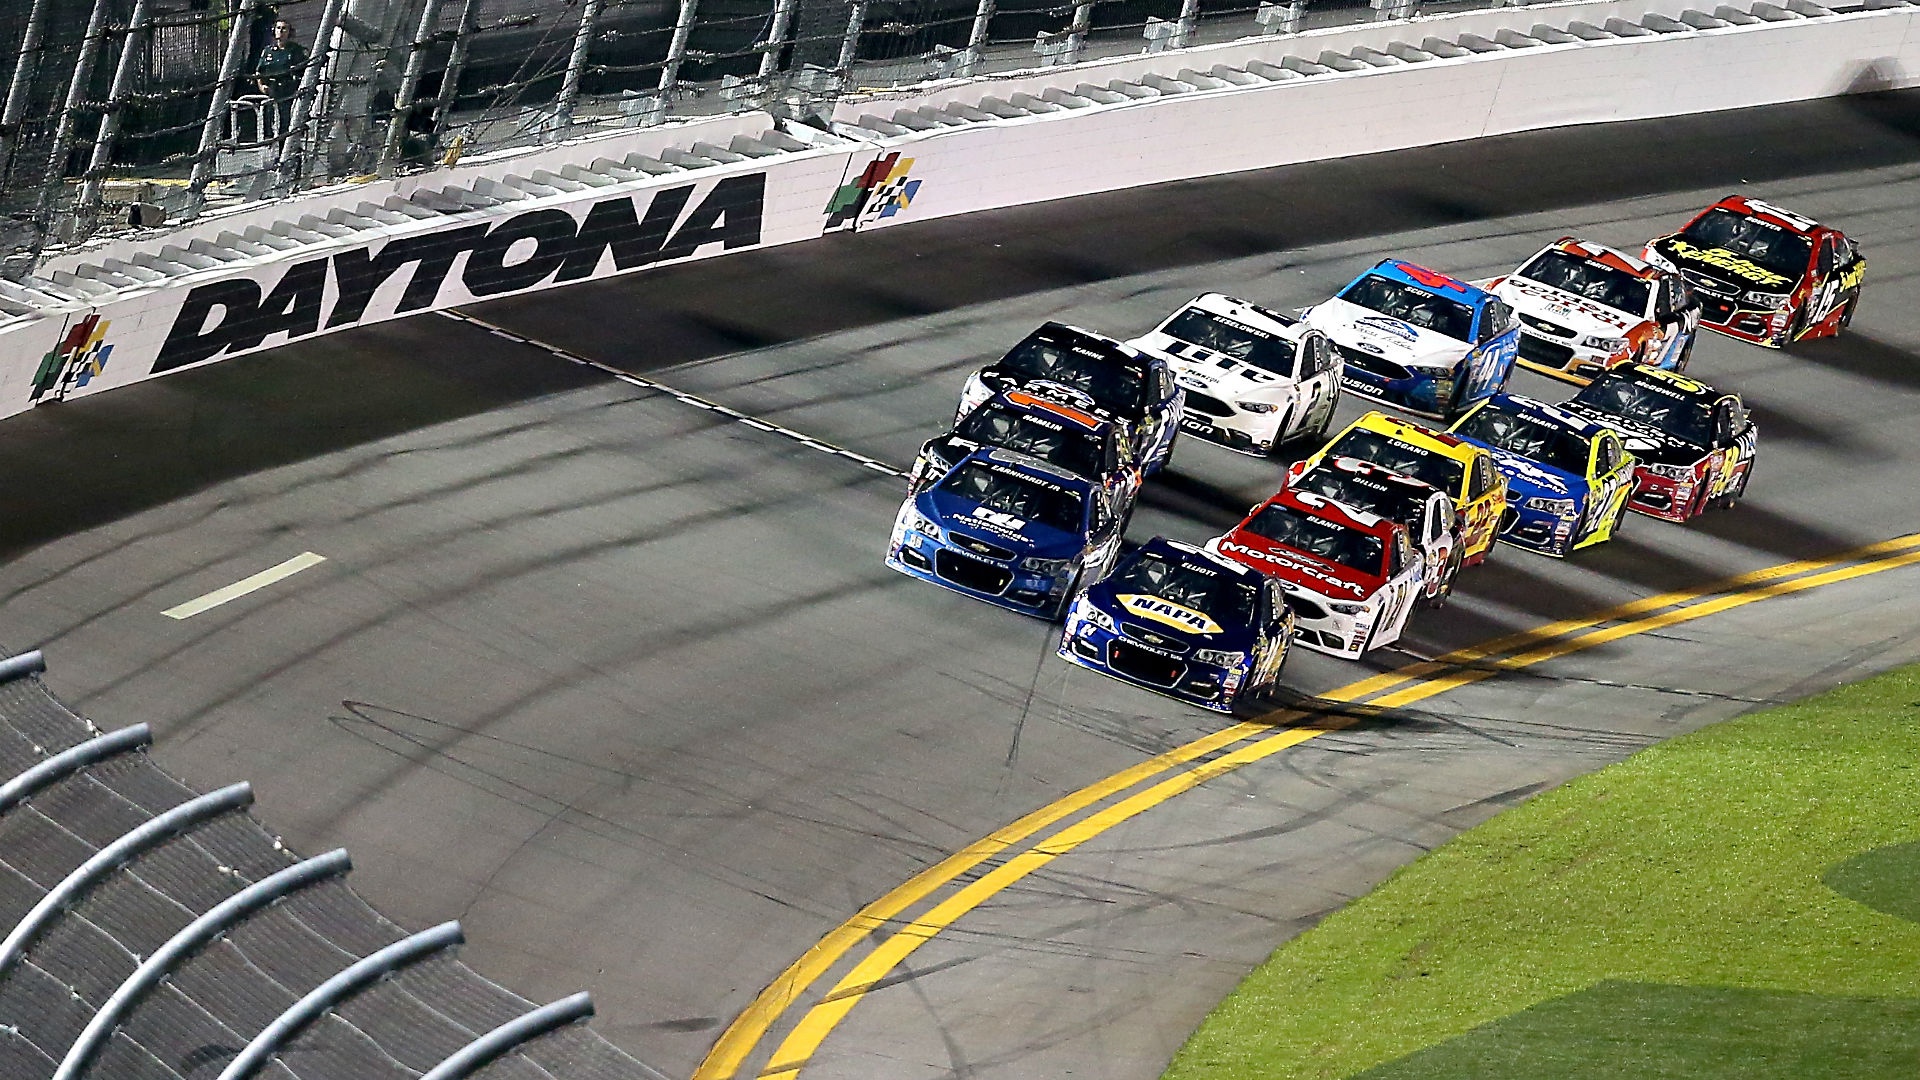 Daytona 500 Entry List shows there will be cats that go home Tireball